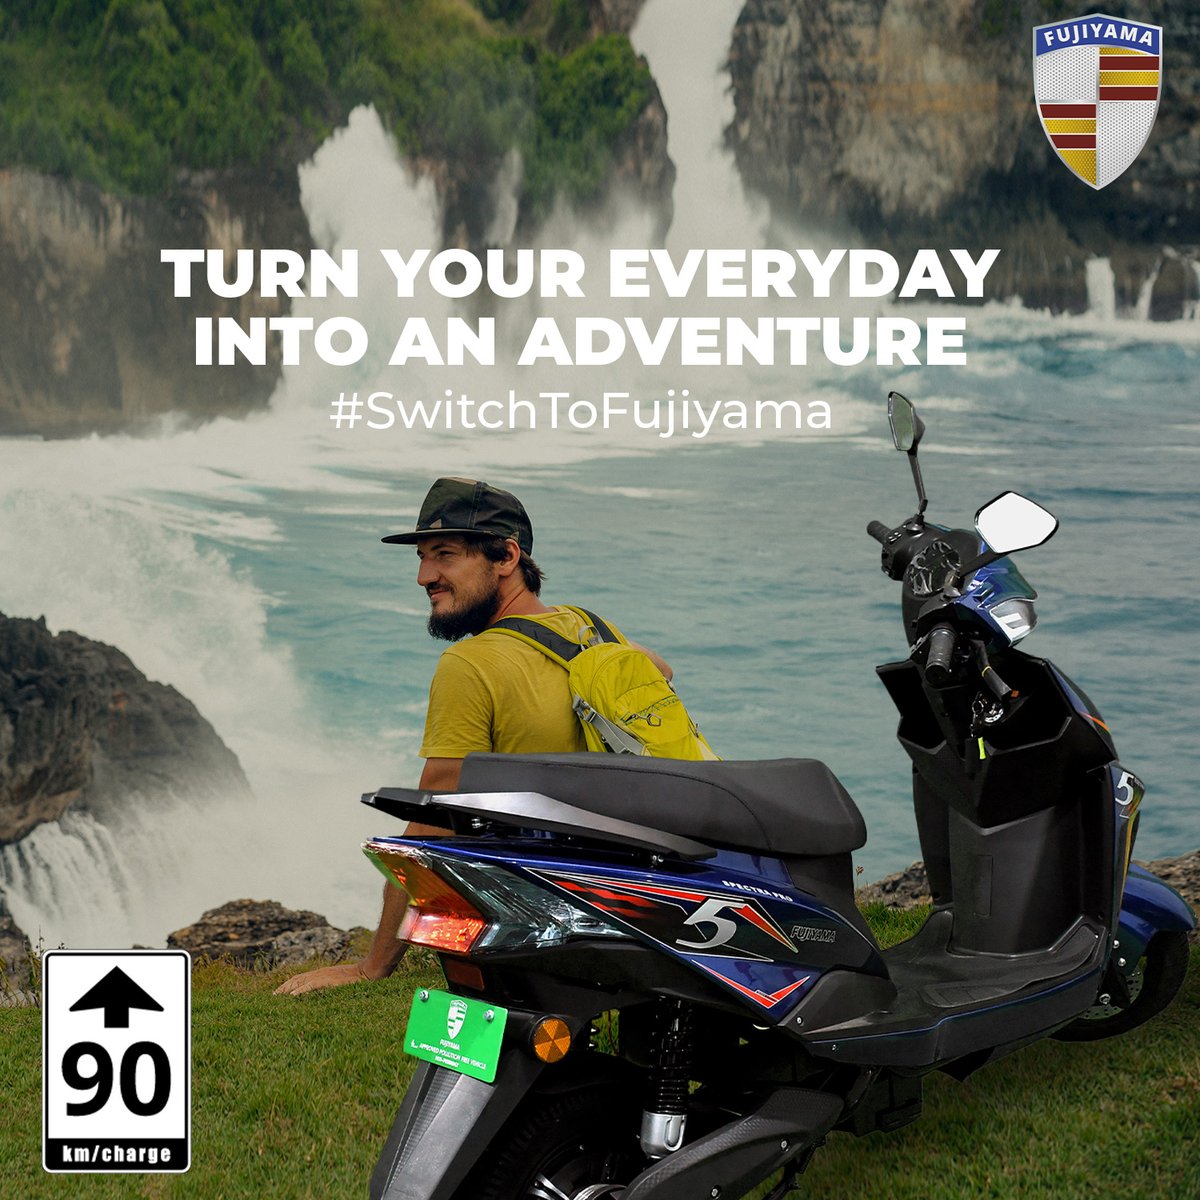 ⚡Experience the thrill of open road and turn your everyday commute into an adventure with FUJIYAMA Electric Scooters. 

#TurnYourEverydayIntoAnAdventure #fujiyama #fujiyamaev #sustainablefuture #adventuretravel #adventureinstyle #switchtofujiyama